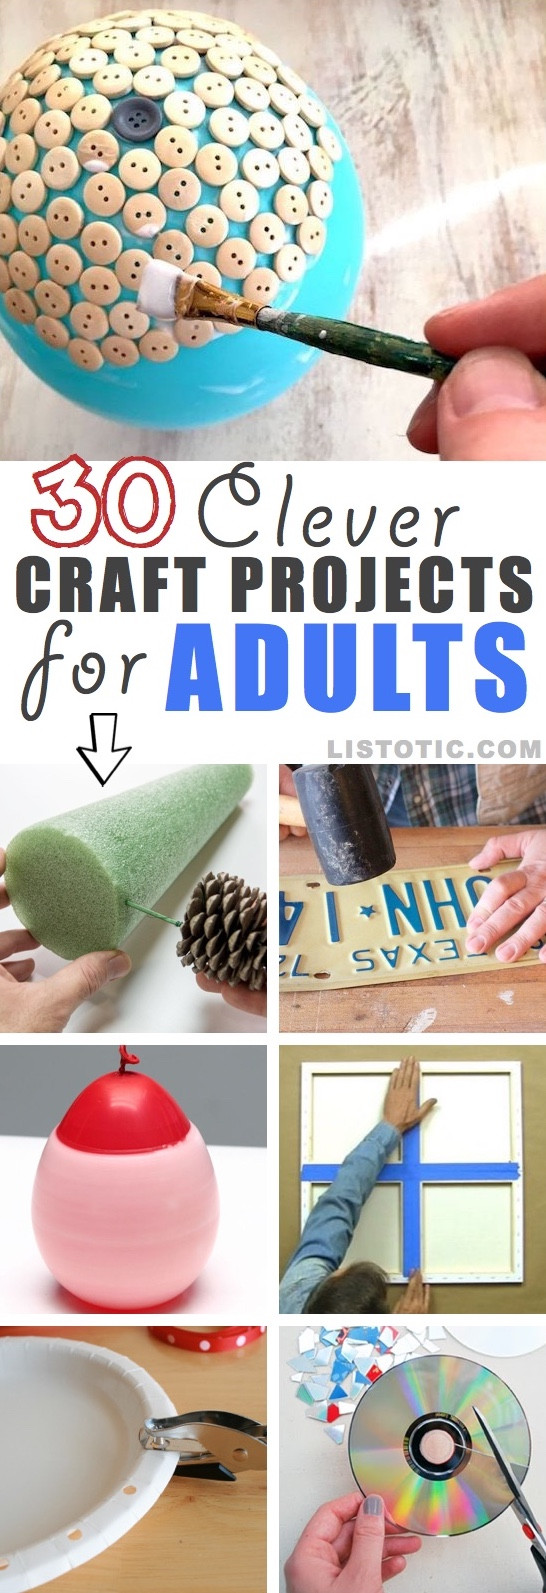 Projects For Adults
 10 Creative Craft Ideas For Adults Abundator